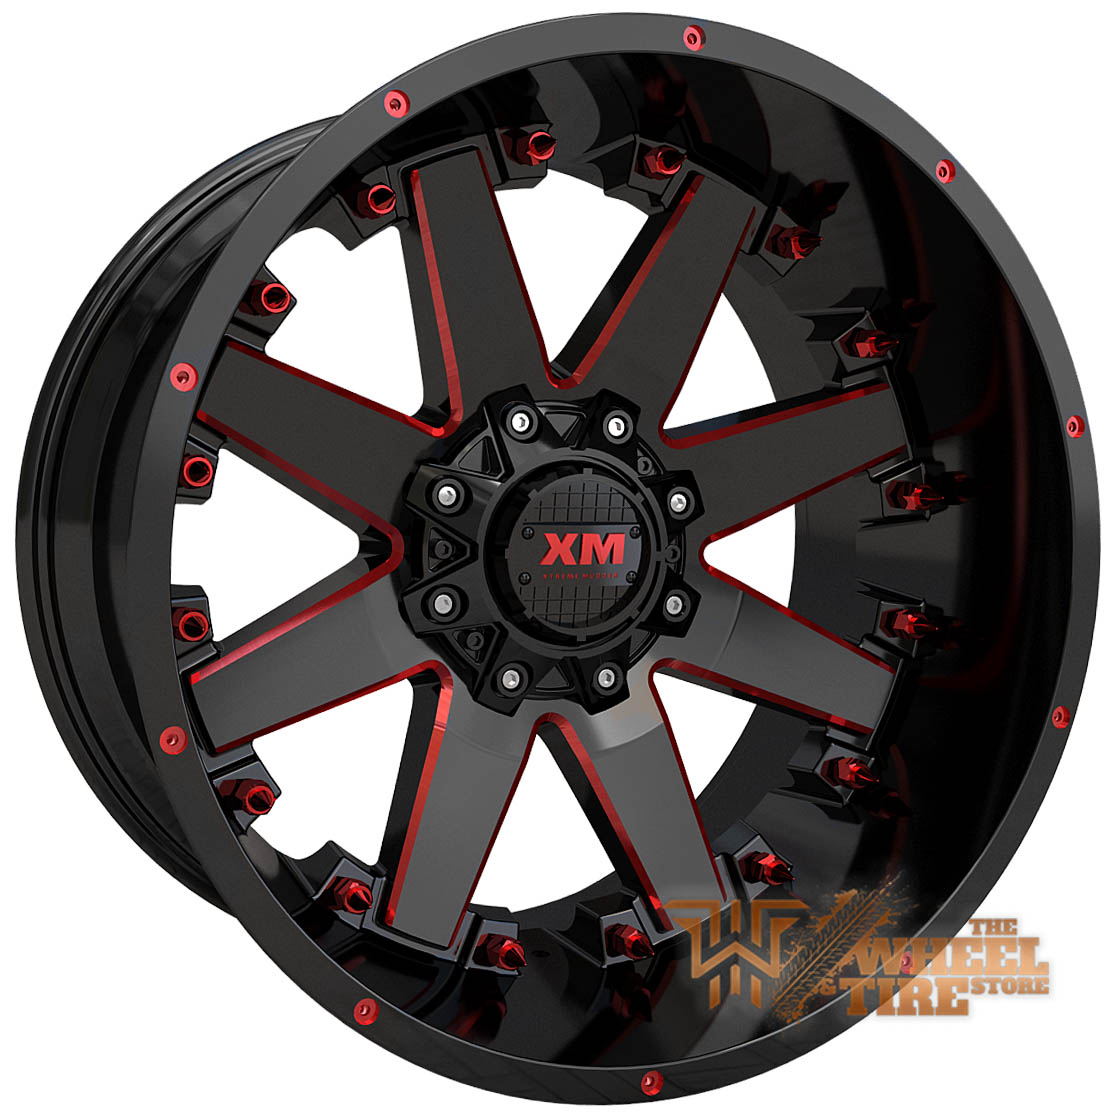 XTREME MUDDER XM-334 Wheel in Gloss Black Red Milled w/ Rivets (Set of 4)